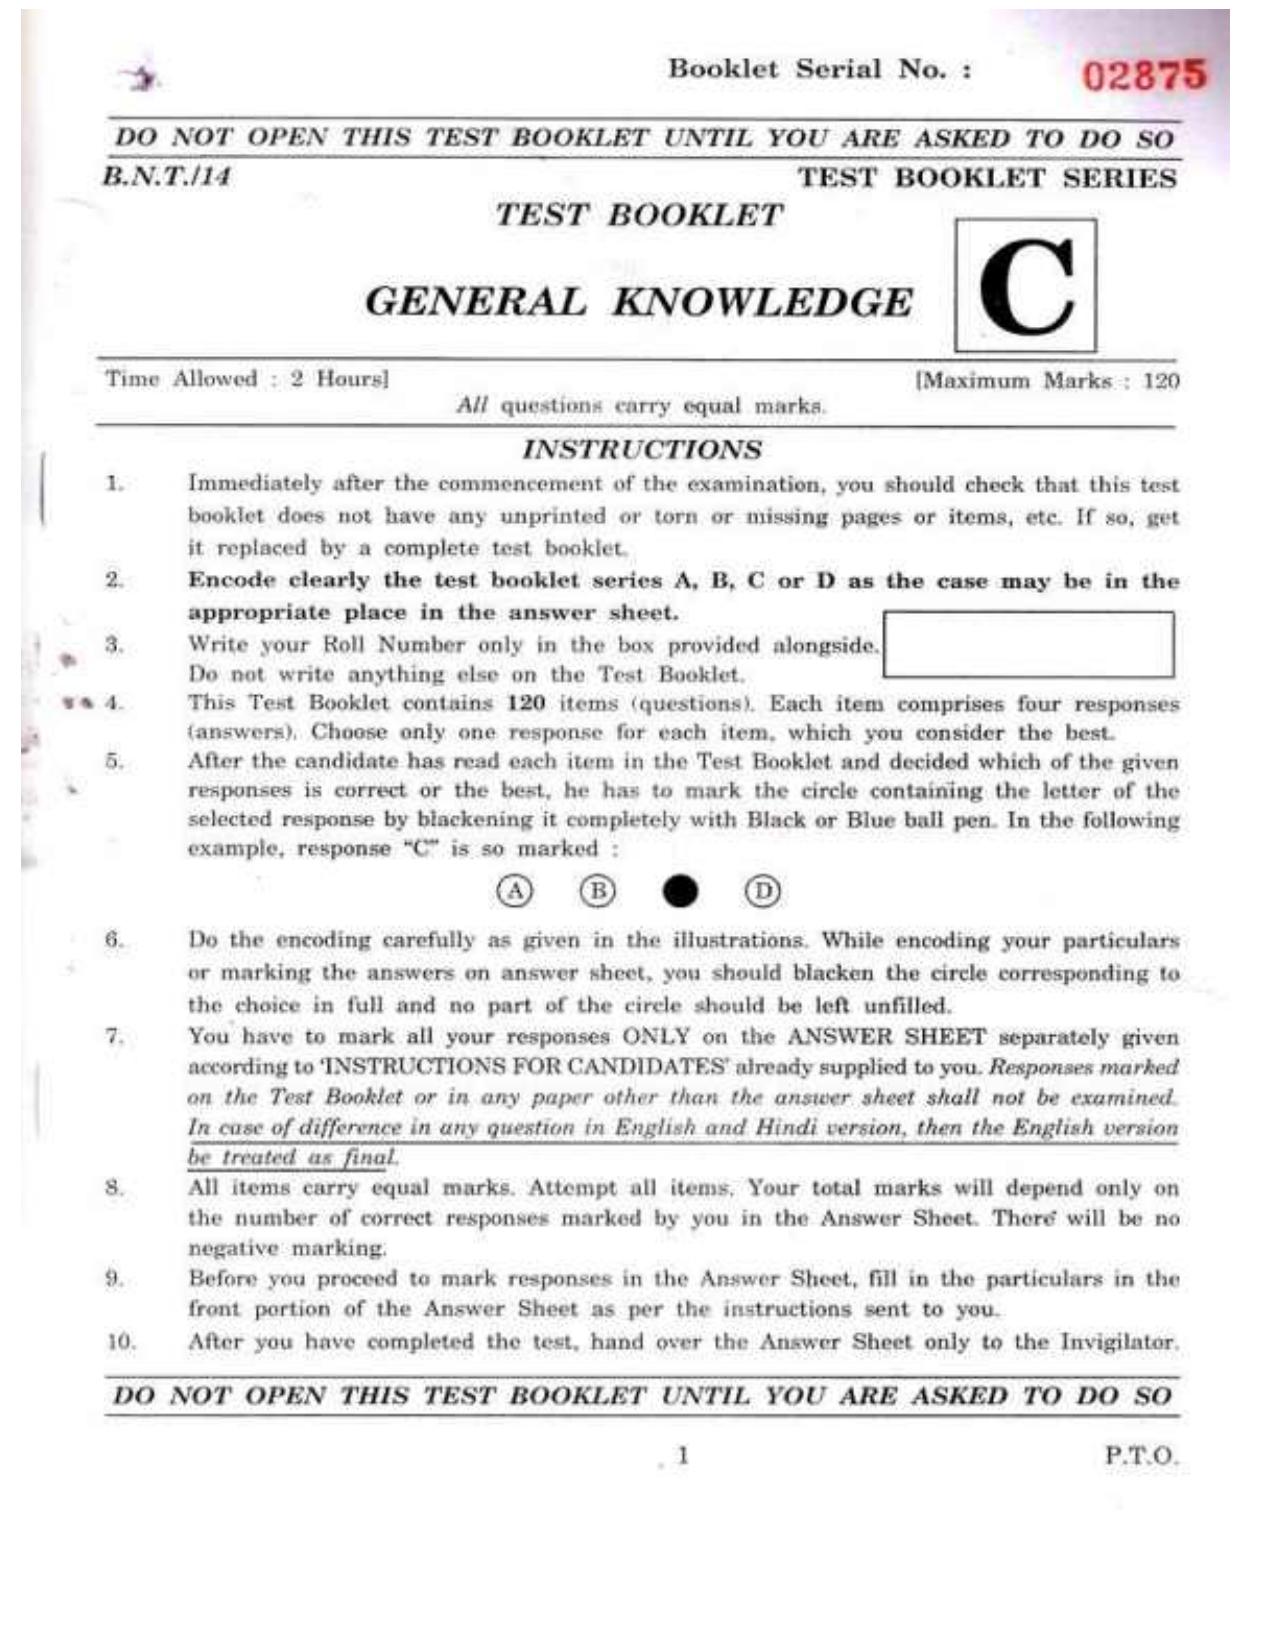 BSMFC Recovery Agent Old Question Papers for General Knowledge - Page 1